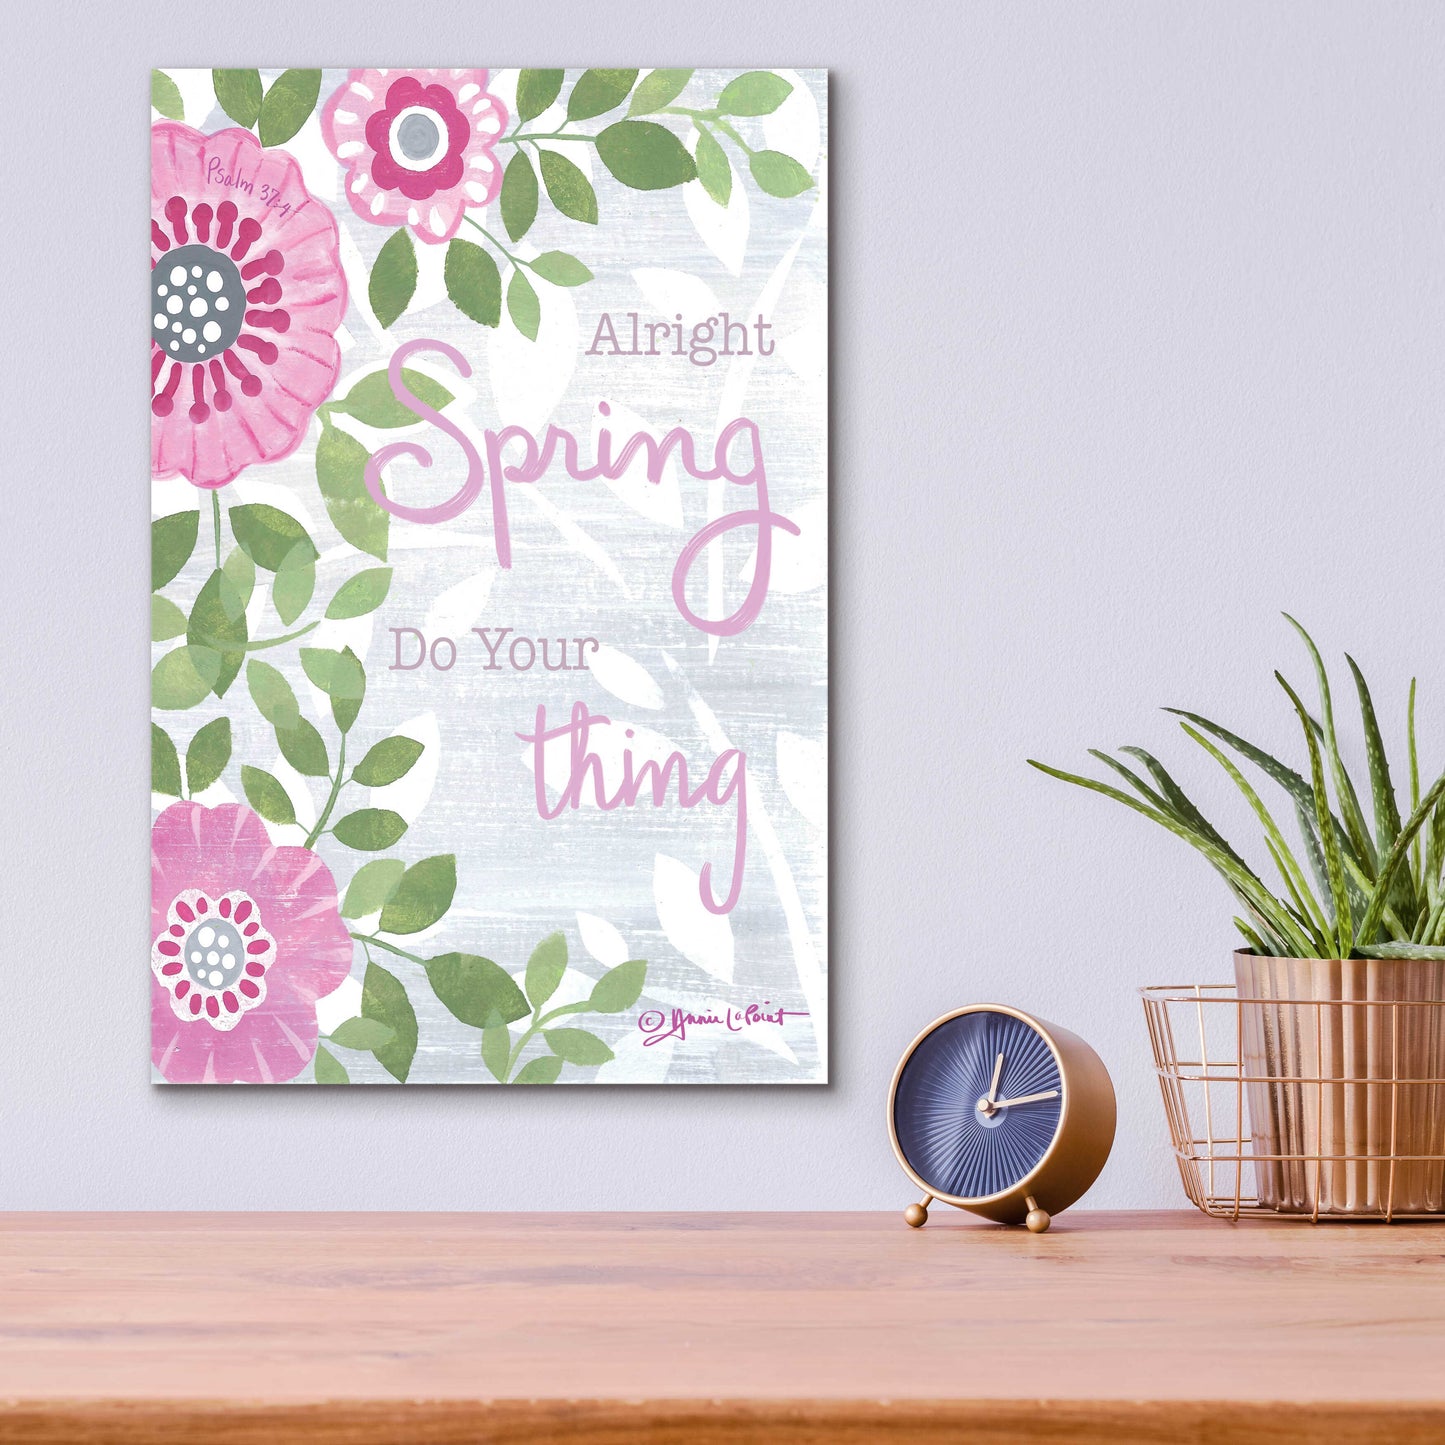 Epic Art 'Spring Do Your Thing' by Annie LaPoint, Acrylic Glass Wall Art,12x16